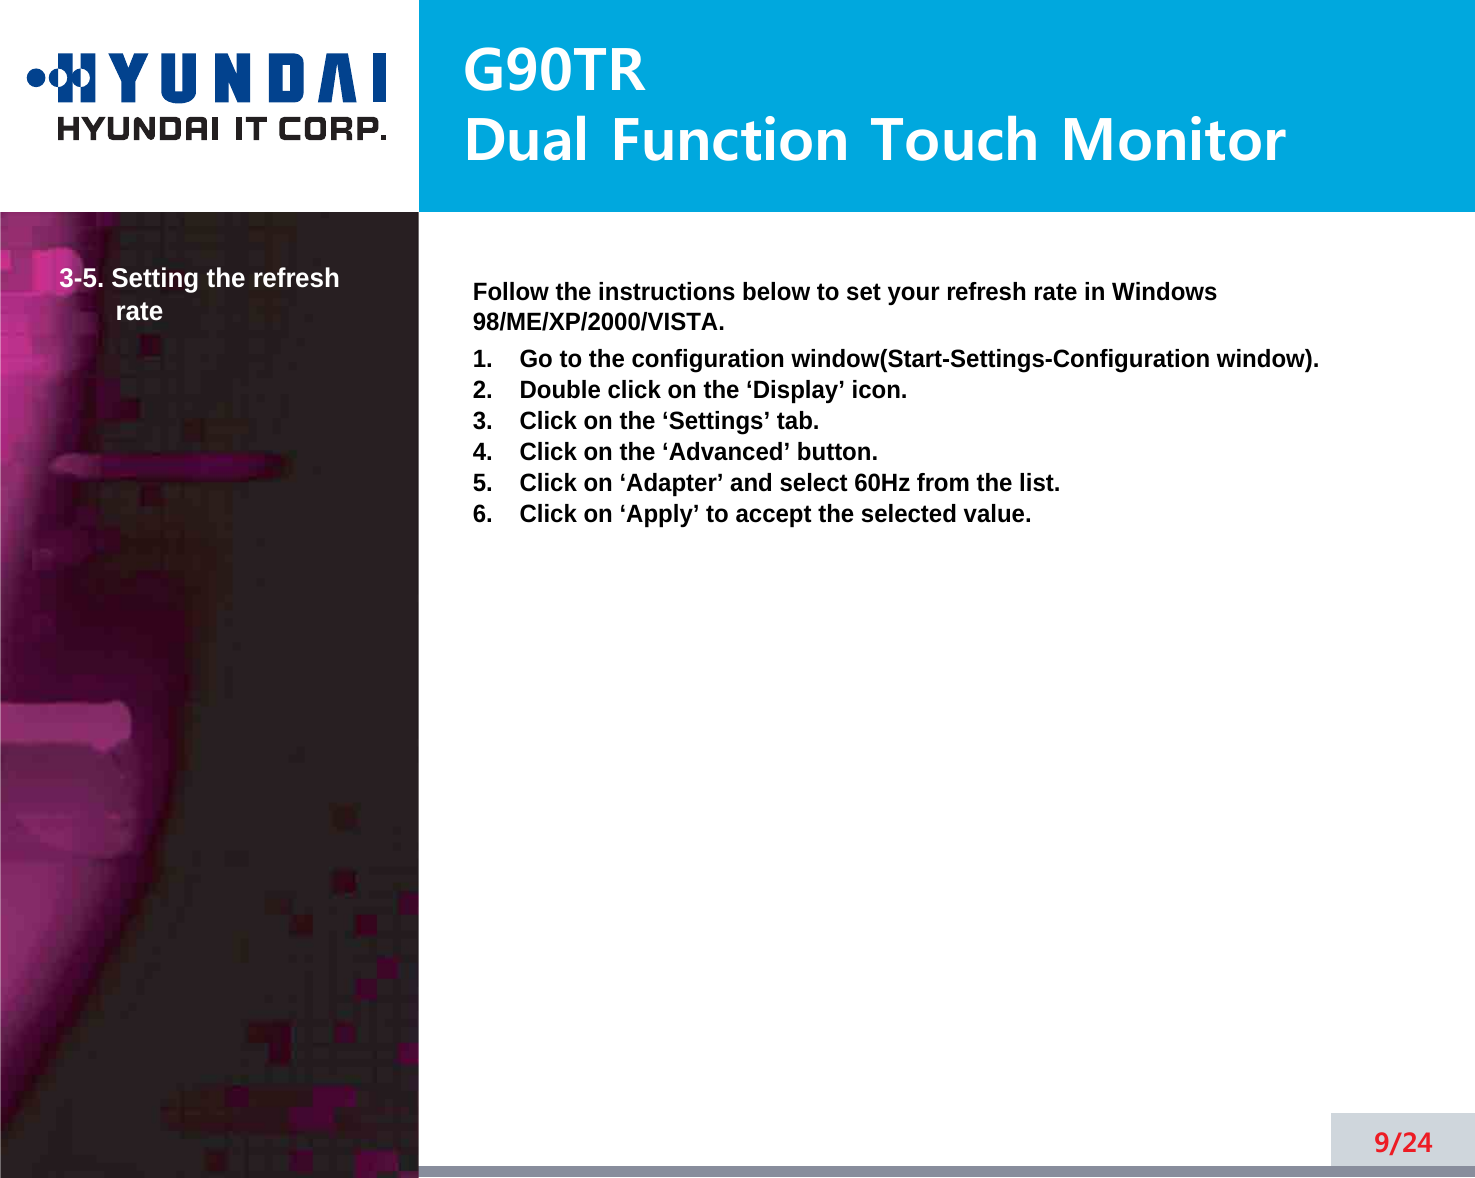 G90TRDual Function Touch Monitor9/243-5. Setting the refreshrate Follow the instructions below to set your refresh rate in Windows98/ME/XP/2000/VISTA.1.    Go to the configuration window(Start-Settings-Configuration window).2.    Double click on the ‘Display’ icon.3.    Click on the ‘Settings’ tab.4.    Click on the ‘Advanced’ button.5.    Click on ‘Adapter’ and select 60Hz from the list.6.    Click on ‘Apply’ to accept the selected value.